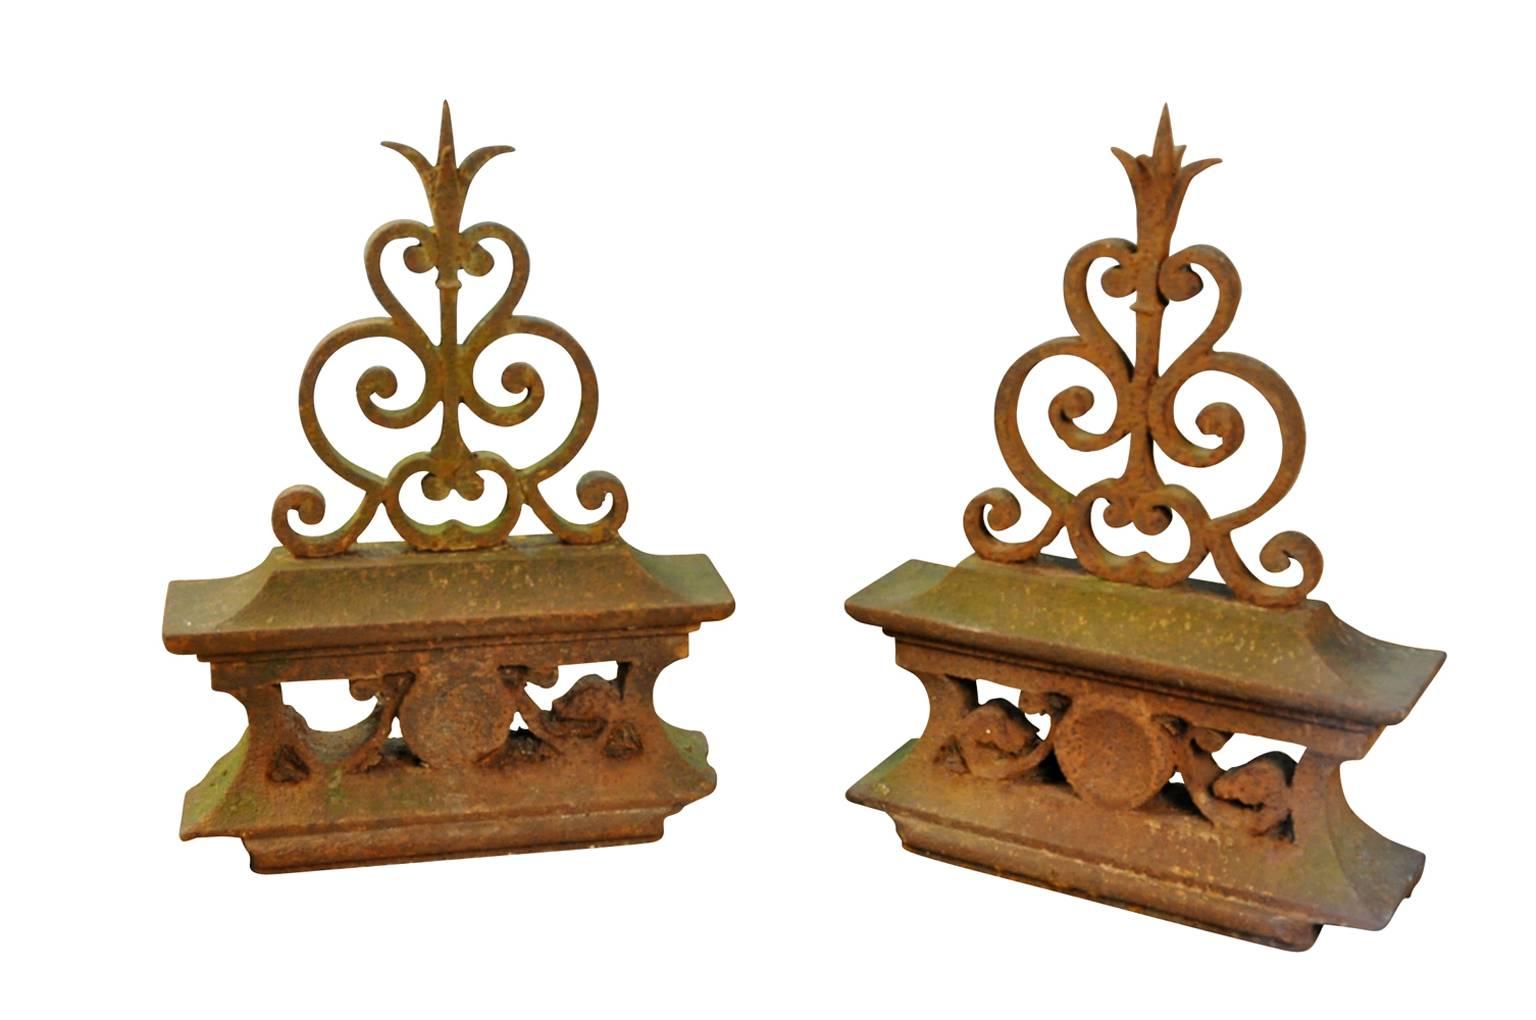 A very handsome pair of later 19th century finials - fragments from the South of France. Wonderfully made is cast iron. Perfect to convert into lamps or place atop a garden wall or gate.